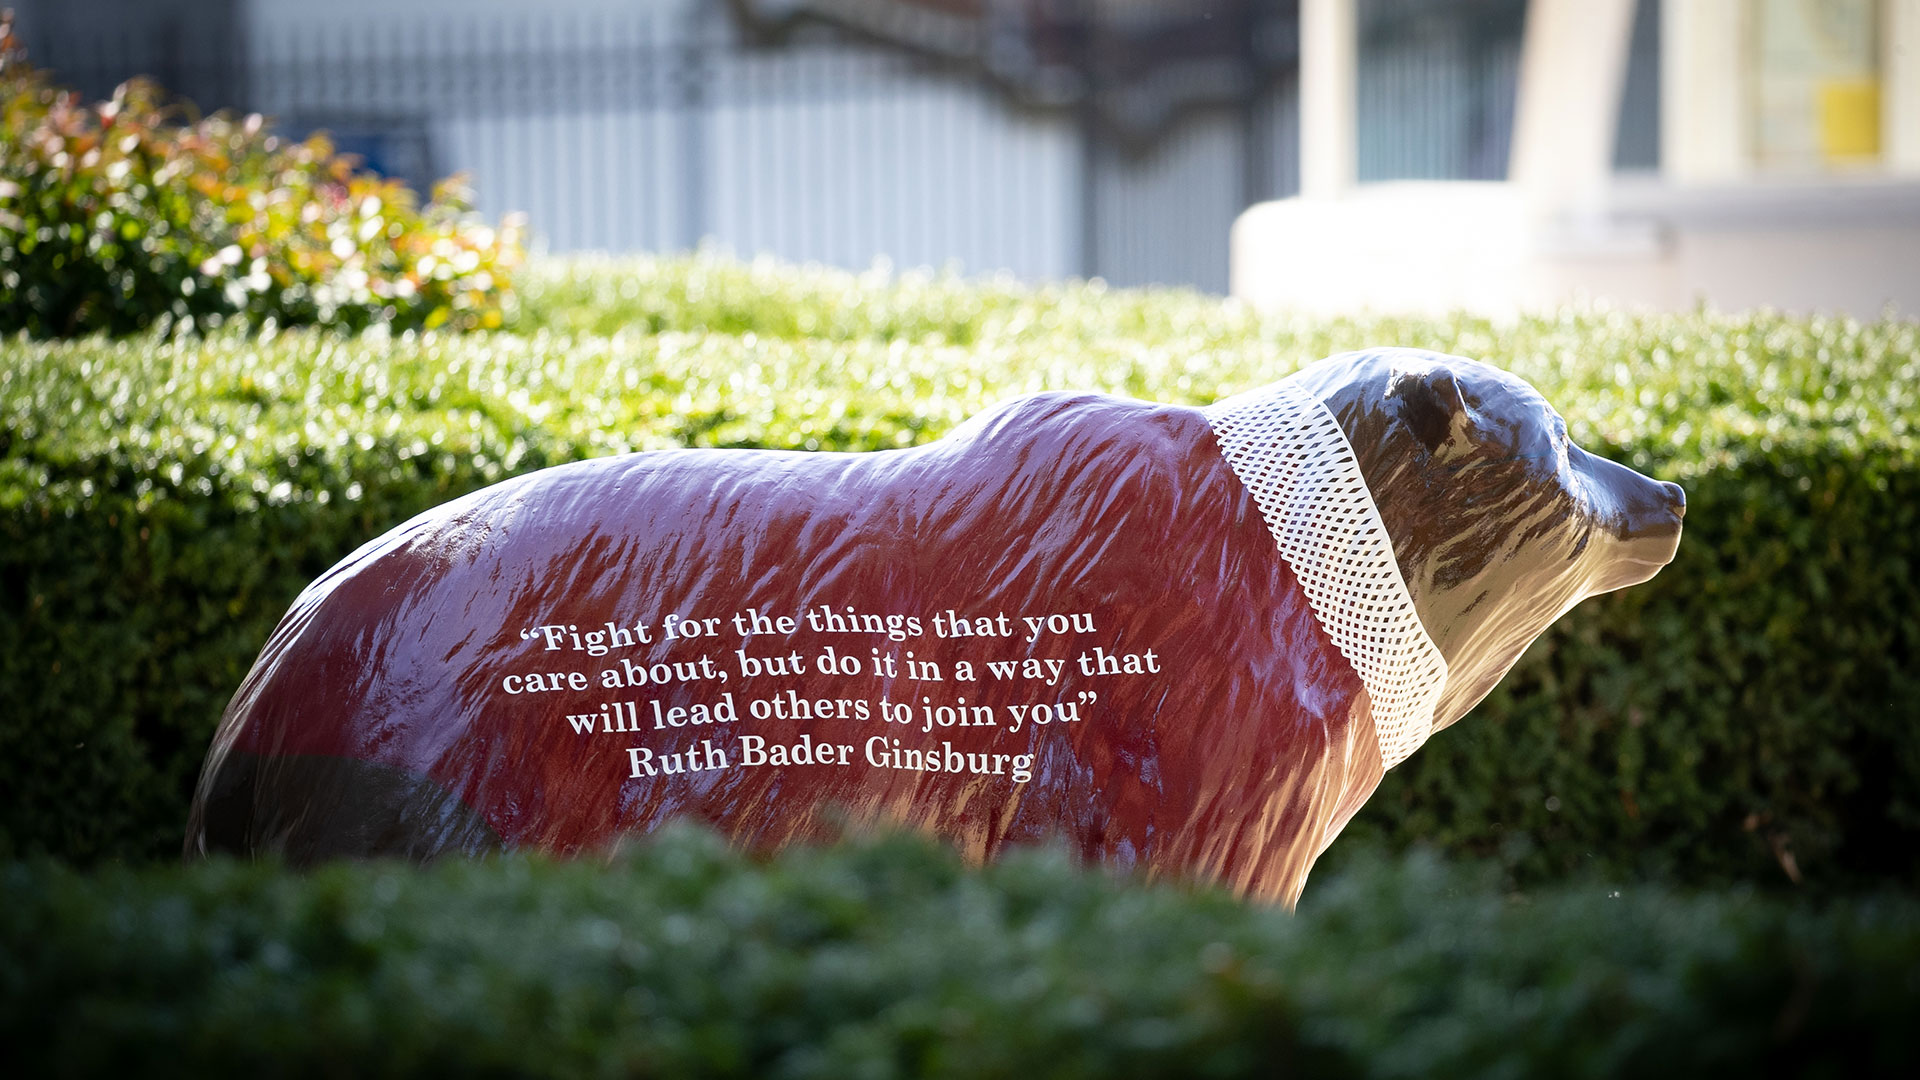 Bear statue with Ruth Bader Ginsburg quote 'Fight for the things that you care about, but do it in a way that will lead others to join you.'